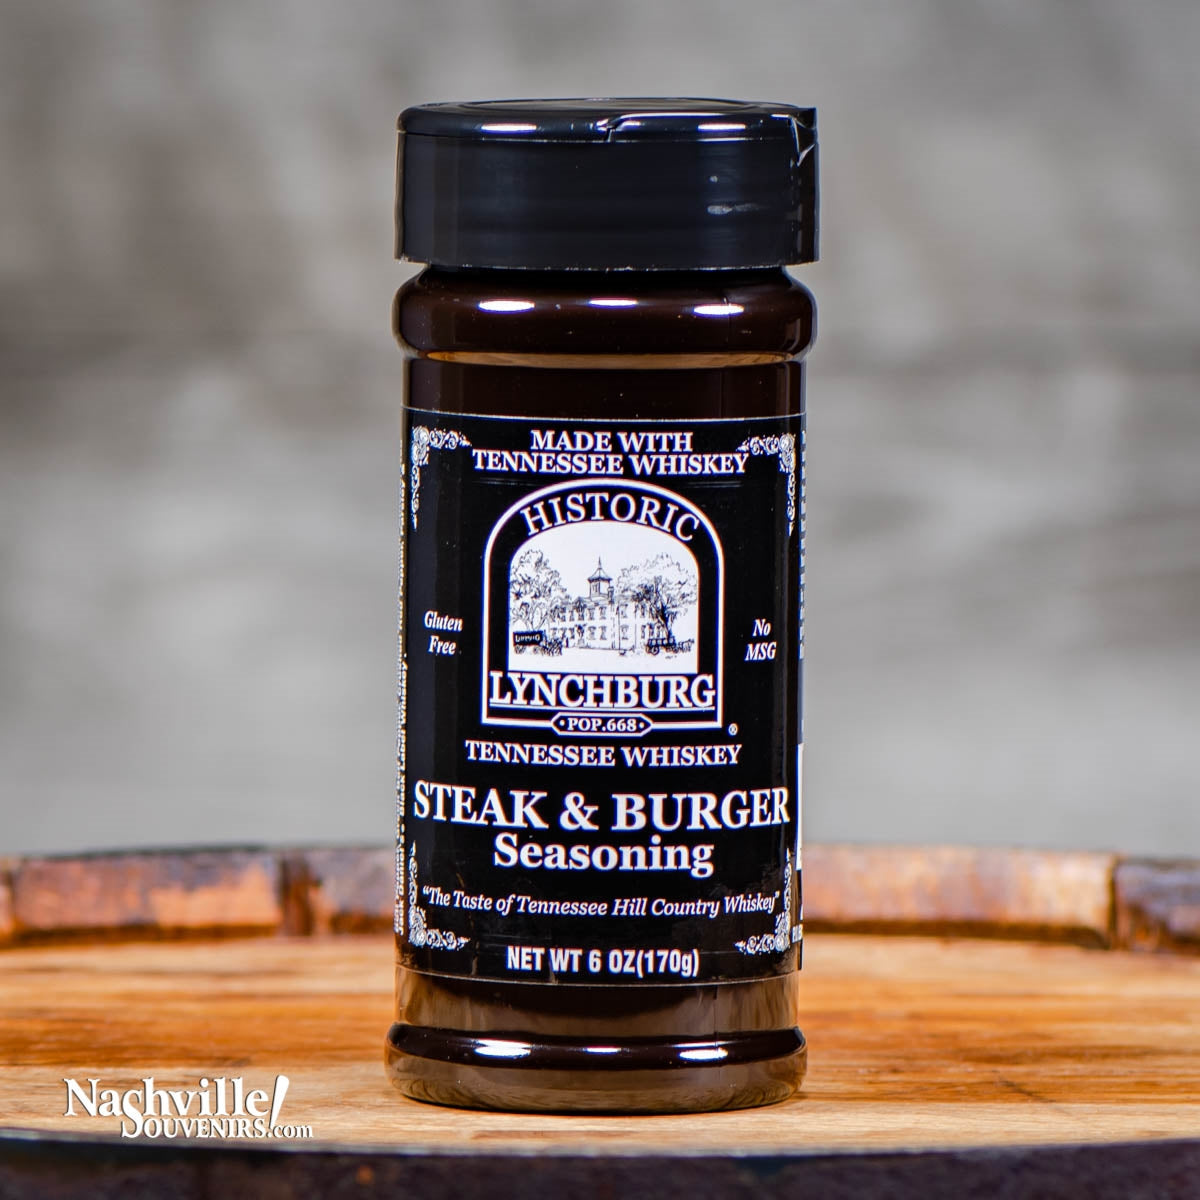 Buy Historic Lynchburg Steak & Burger Seasoning containing real Jack Daniels Tennessee whiskey.  FREE SHIPPING on all US orders over $75!